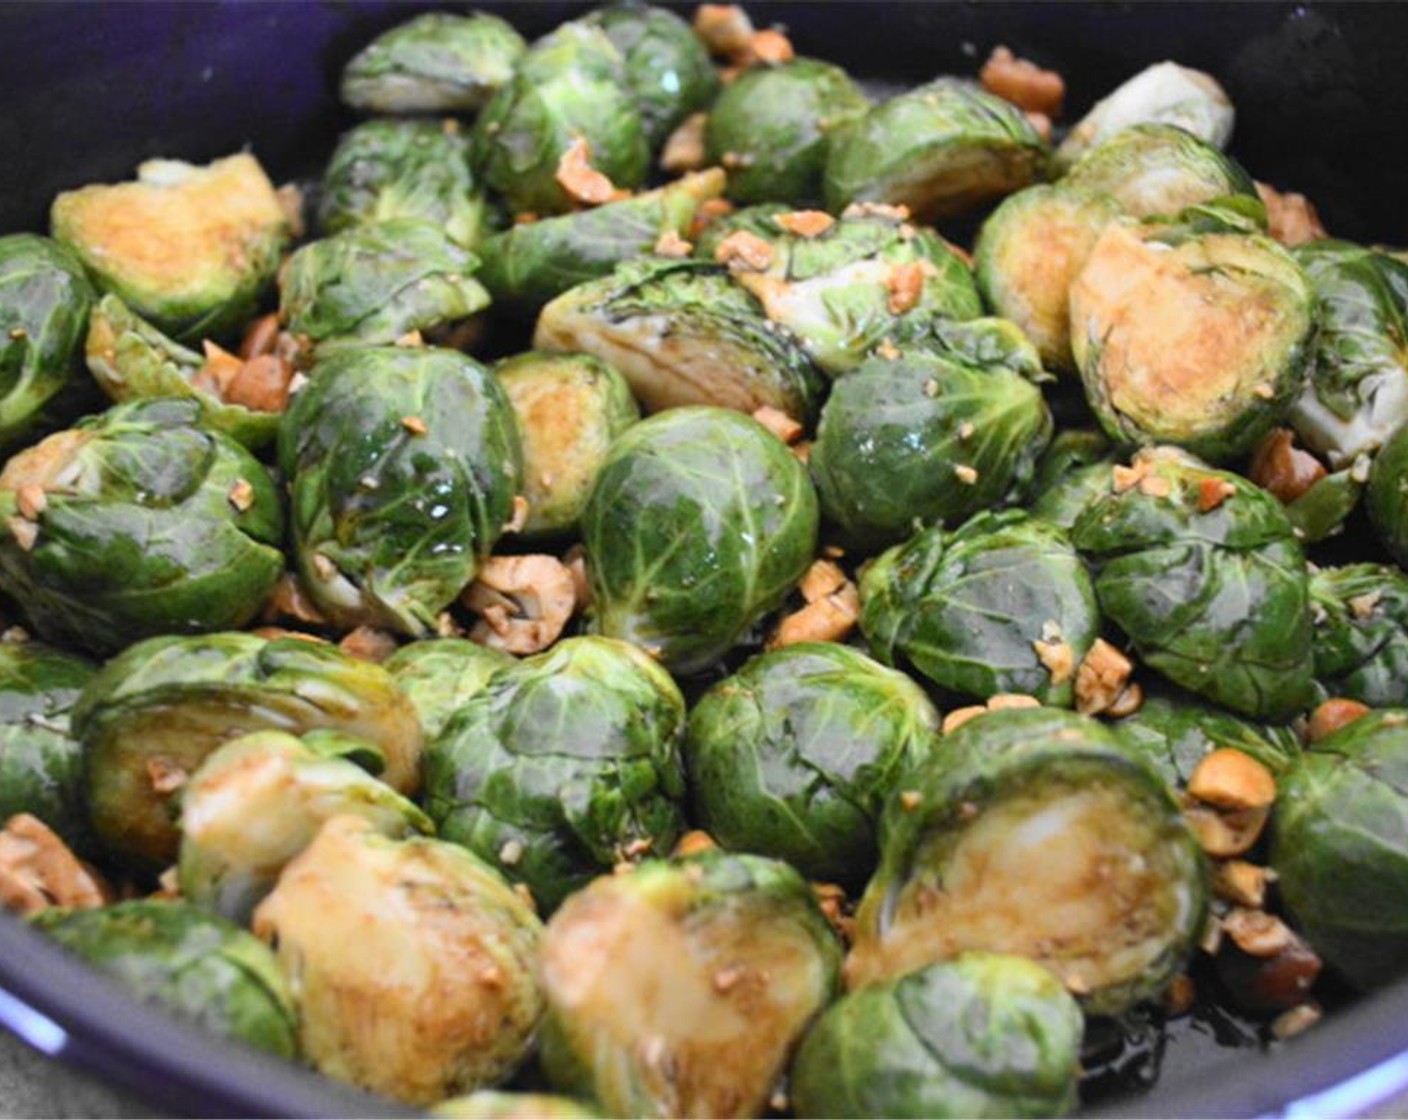 step 2 Spread the Brussels Sprouts (16) evenly on a large baking dish. Mix Toasted Sesame Oil (1/4 cup), Soy Sauce (2 Tbsp), Sriracha (1 dash) and Worcestershire Sauce (1 dash) in a bowl. Pour over brussels sprouts. Toss in Cashew Nuts (1/2 cup) and mix well.